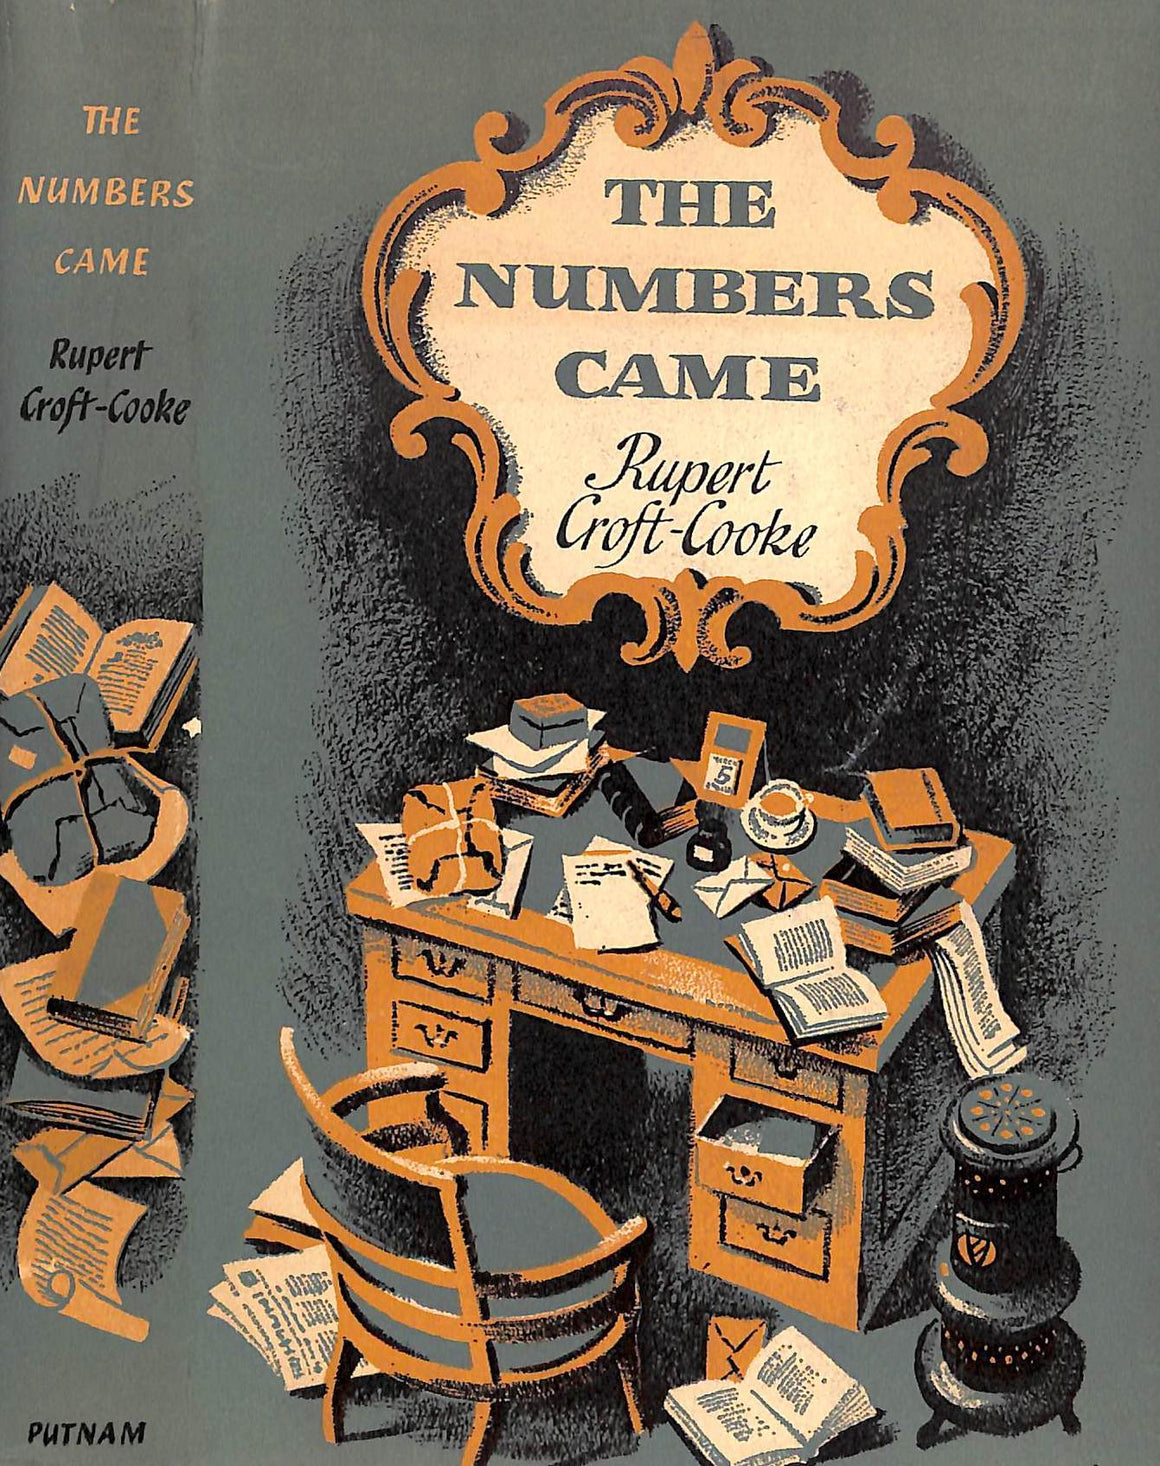 "The Numbers Came" 1963 CROFT-COOKE, Rupert